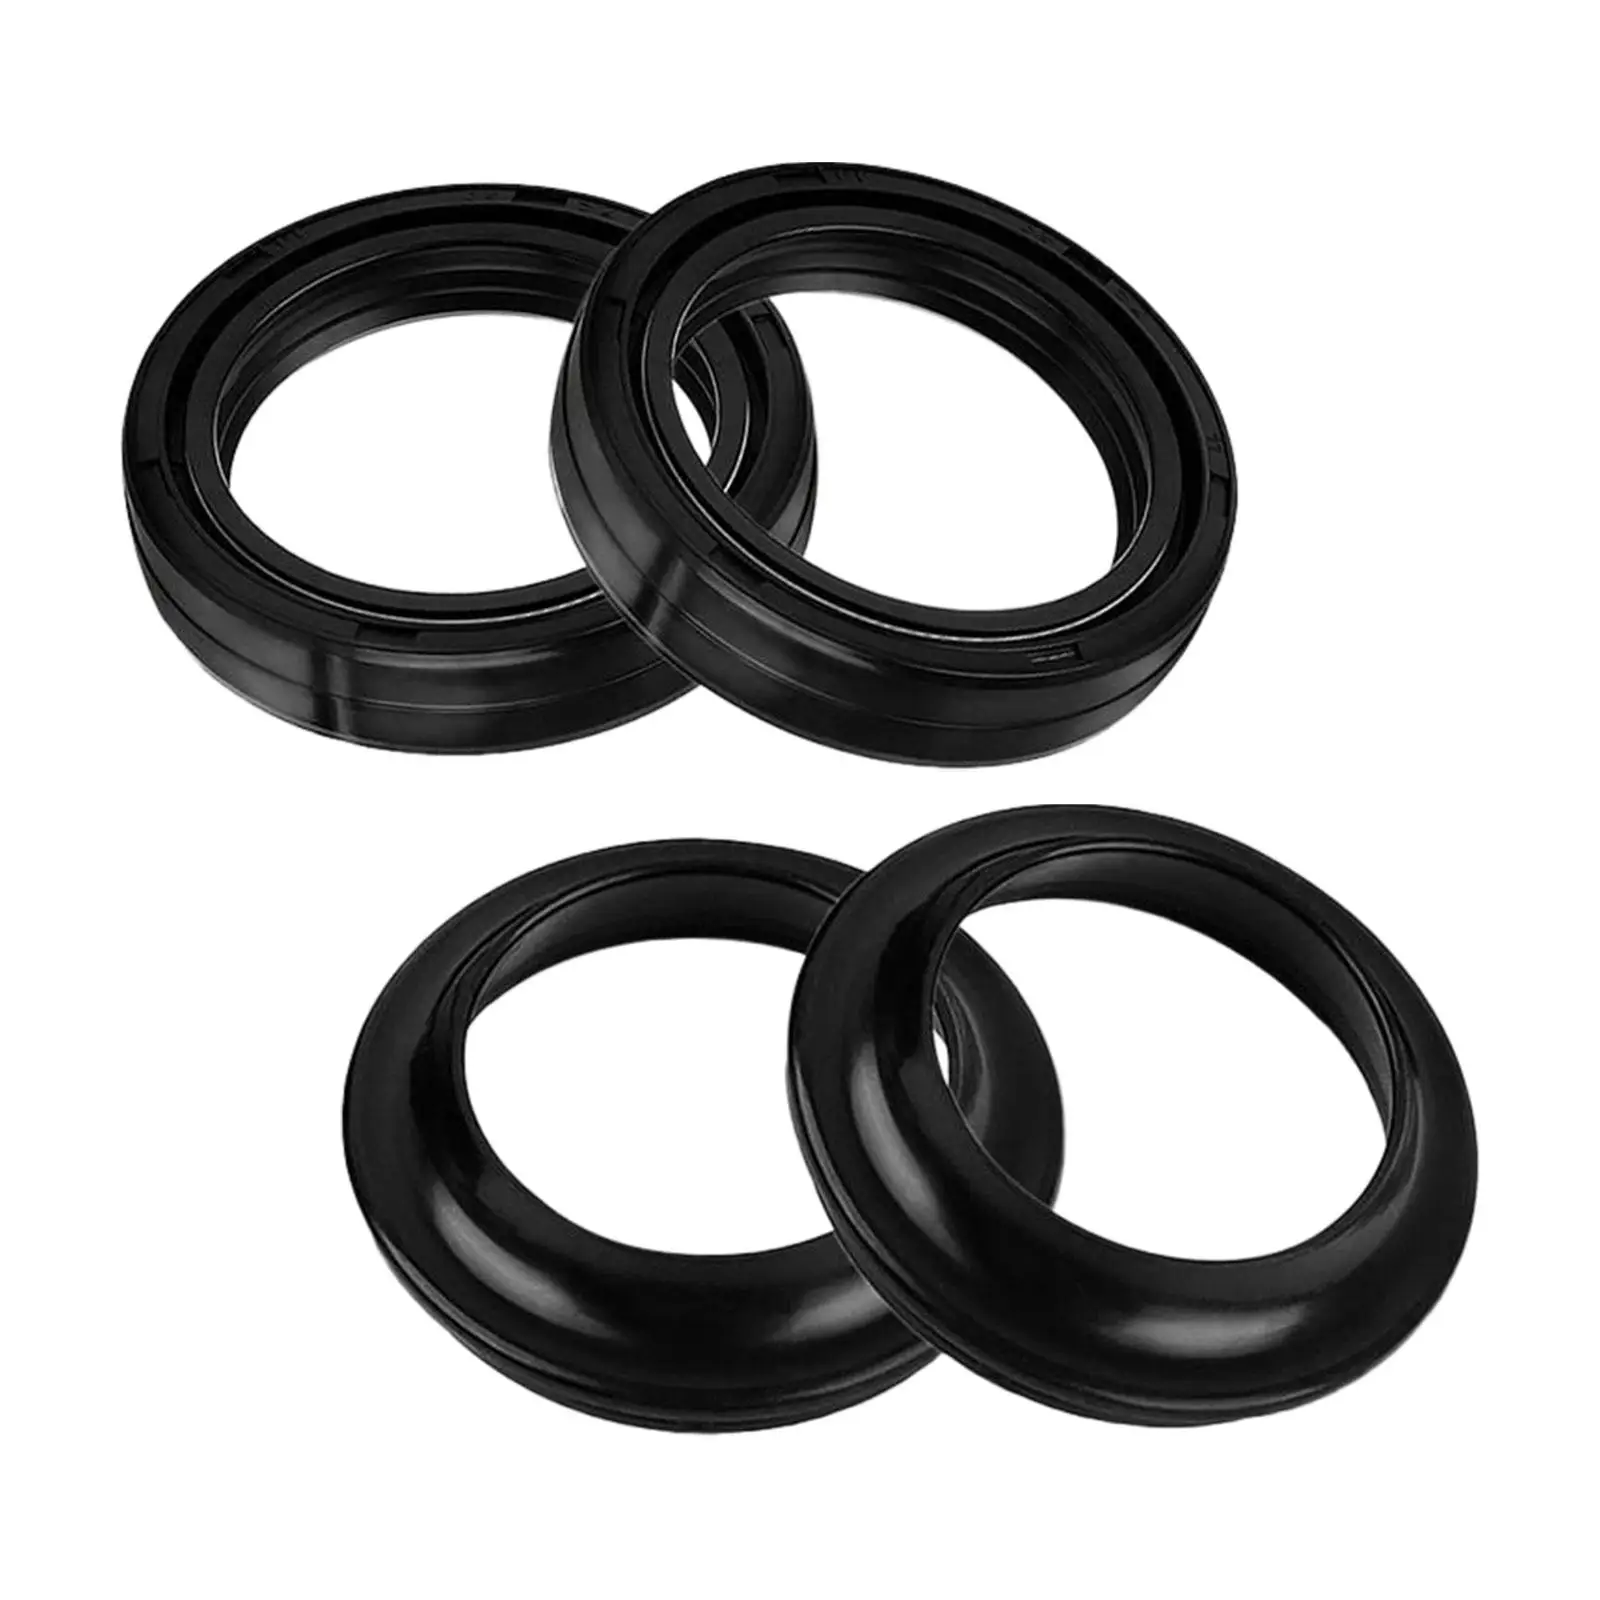 4Pcs Front Fork Oil Seal and Dust Seal 39x52x11mm for Harley XL883N